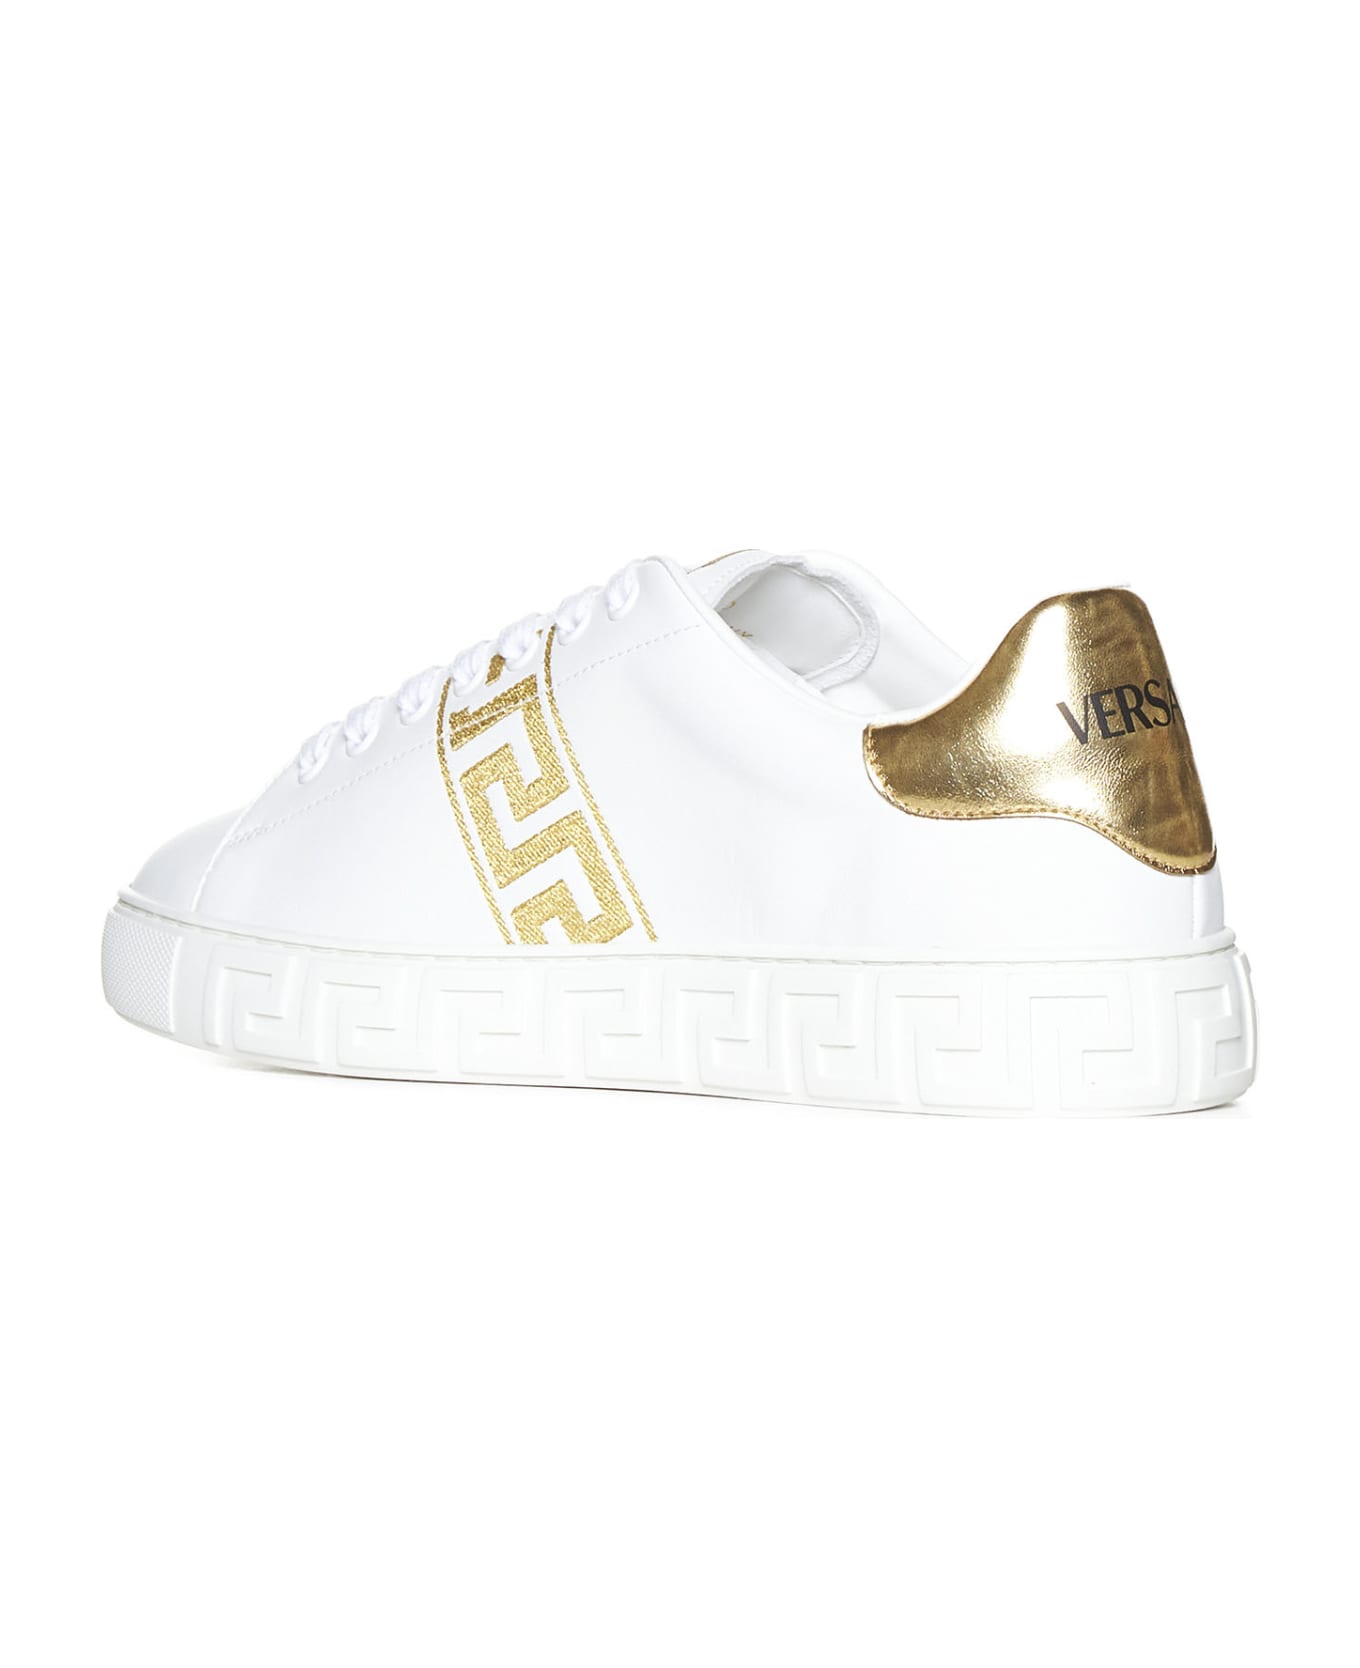 Versace Sneakers - White gold スニーカー